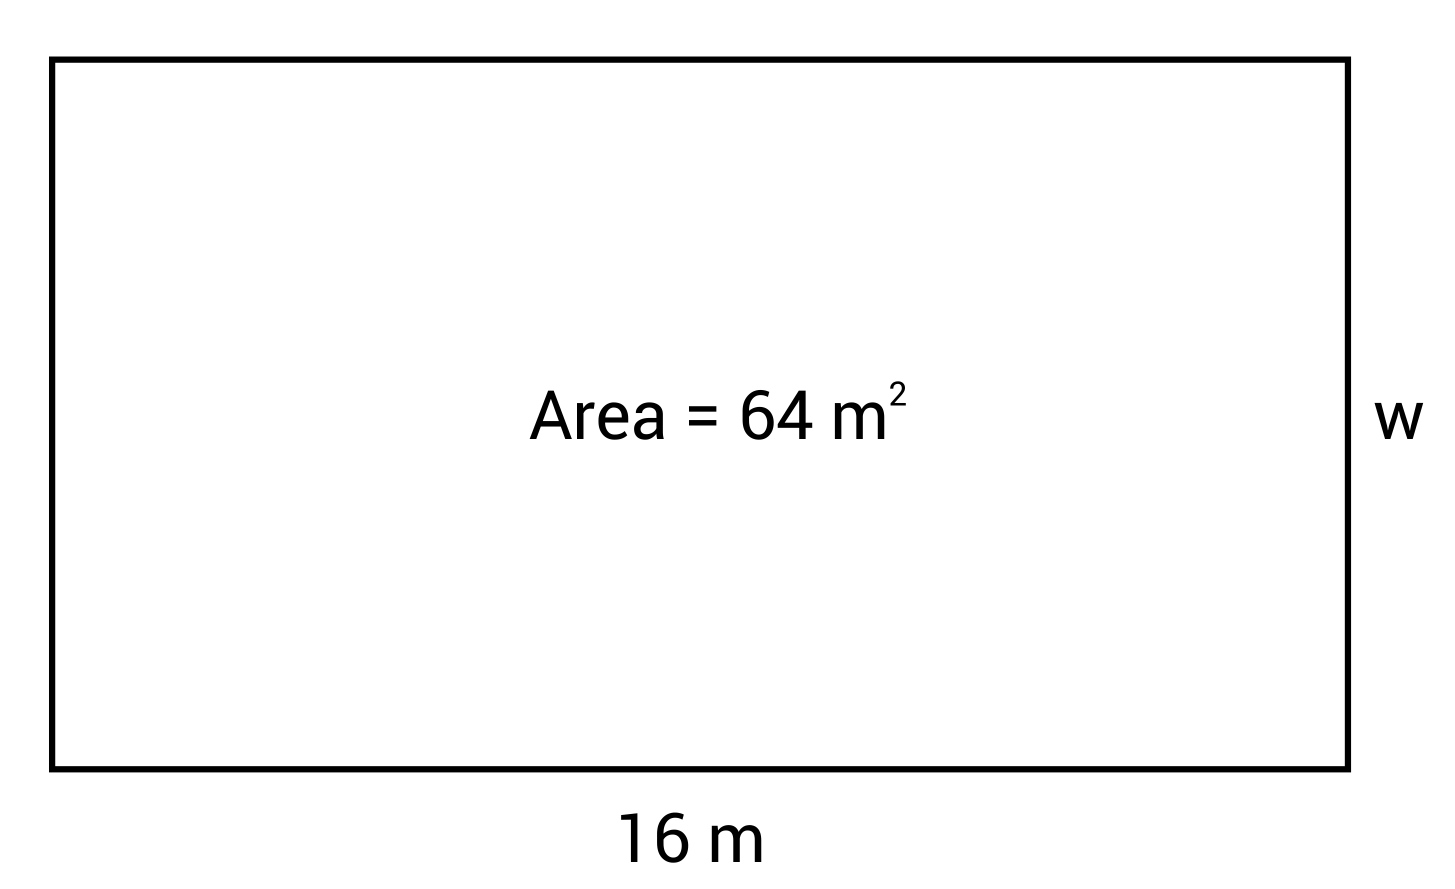 rectangle with an area of 64 sq m and width of 16 m